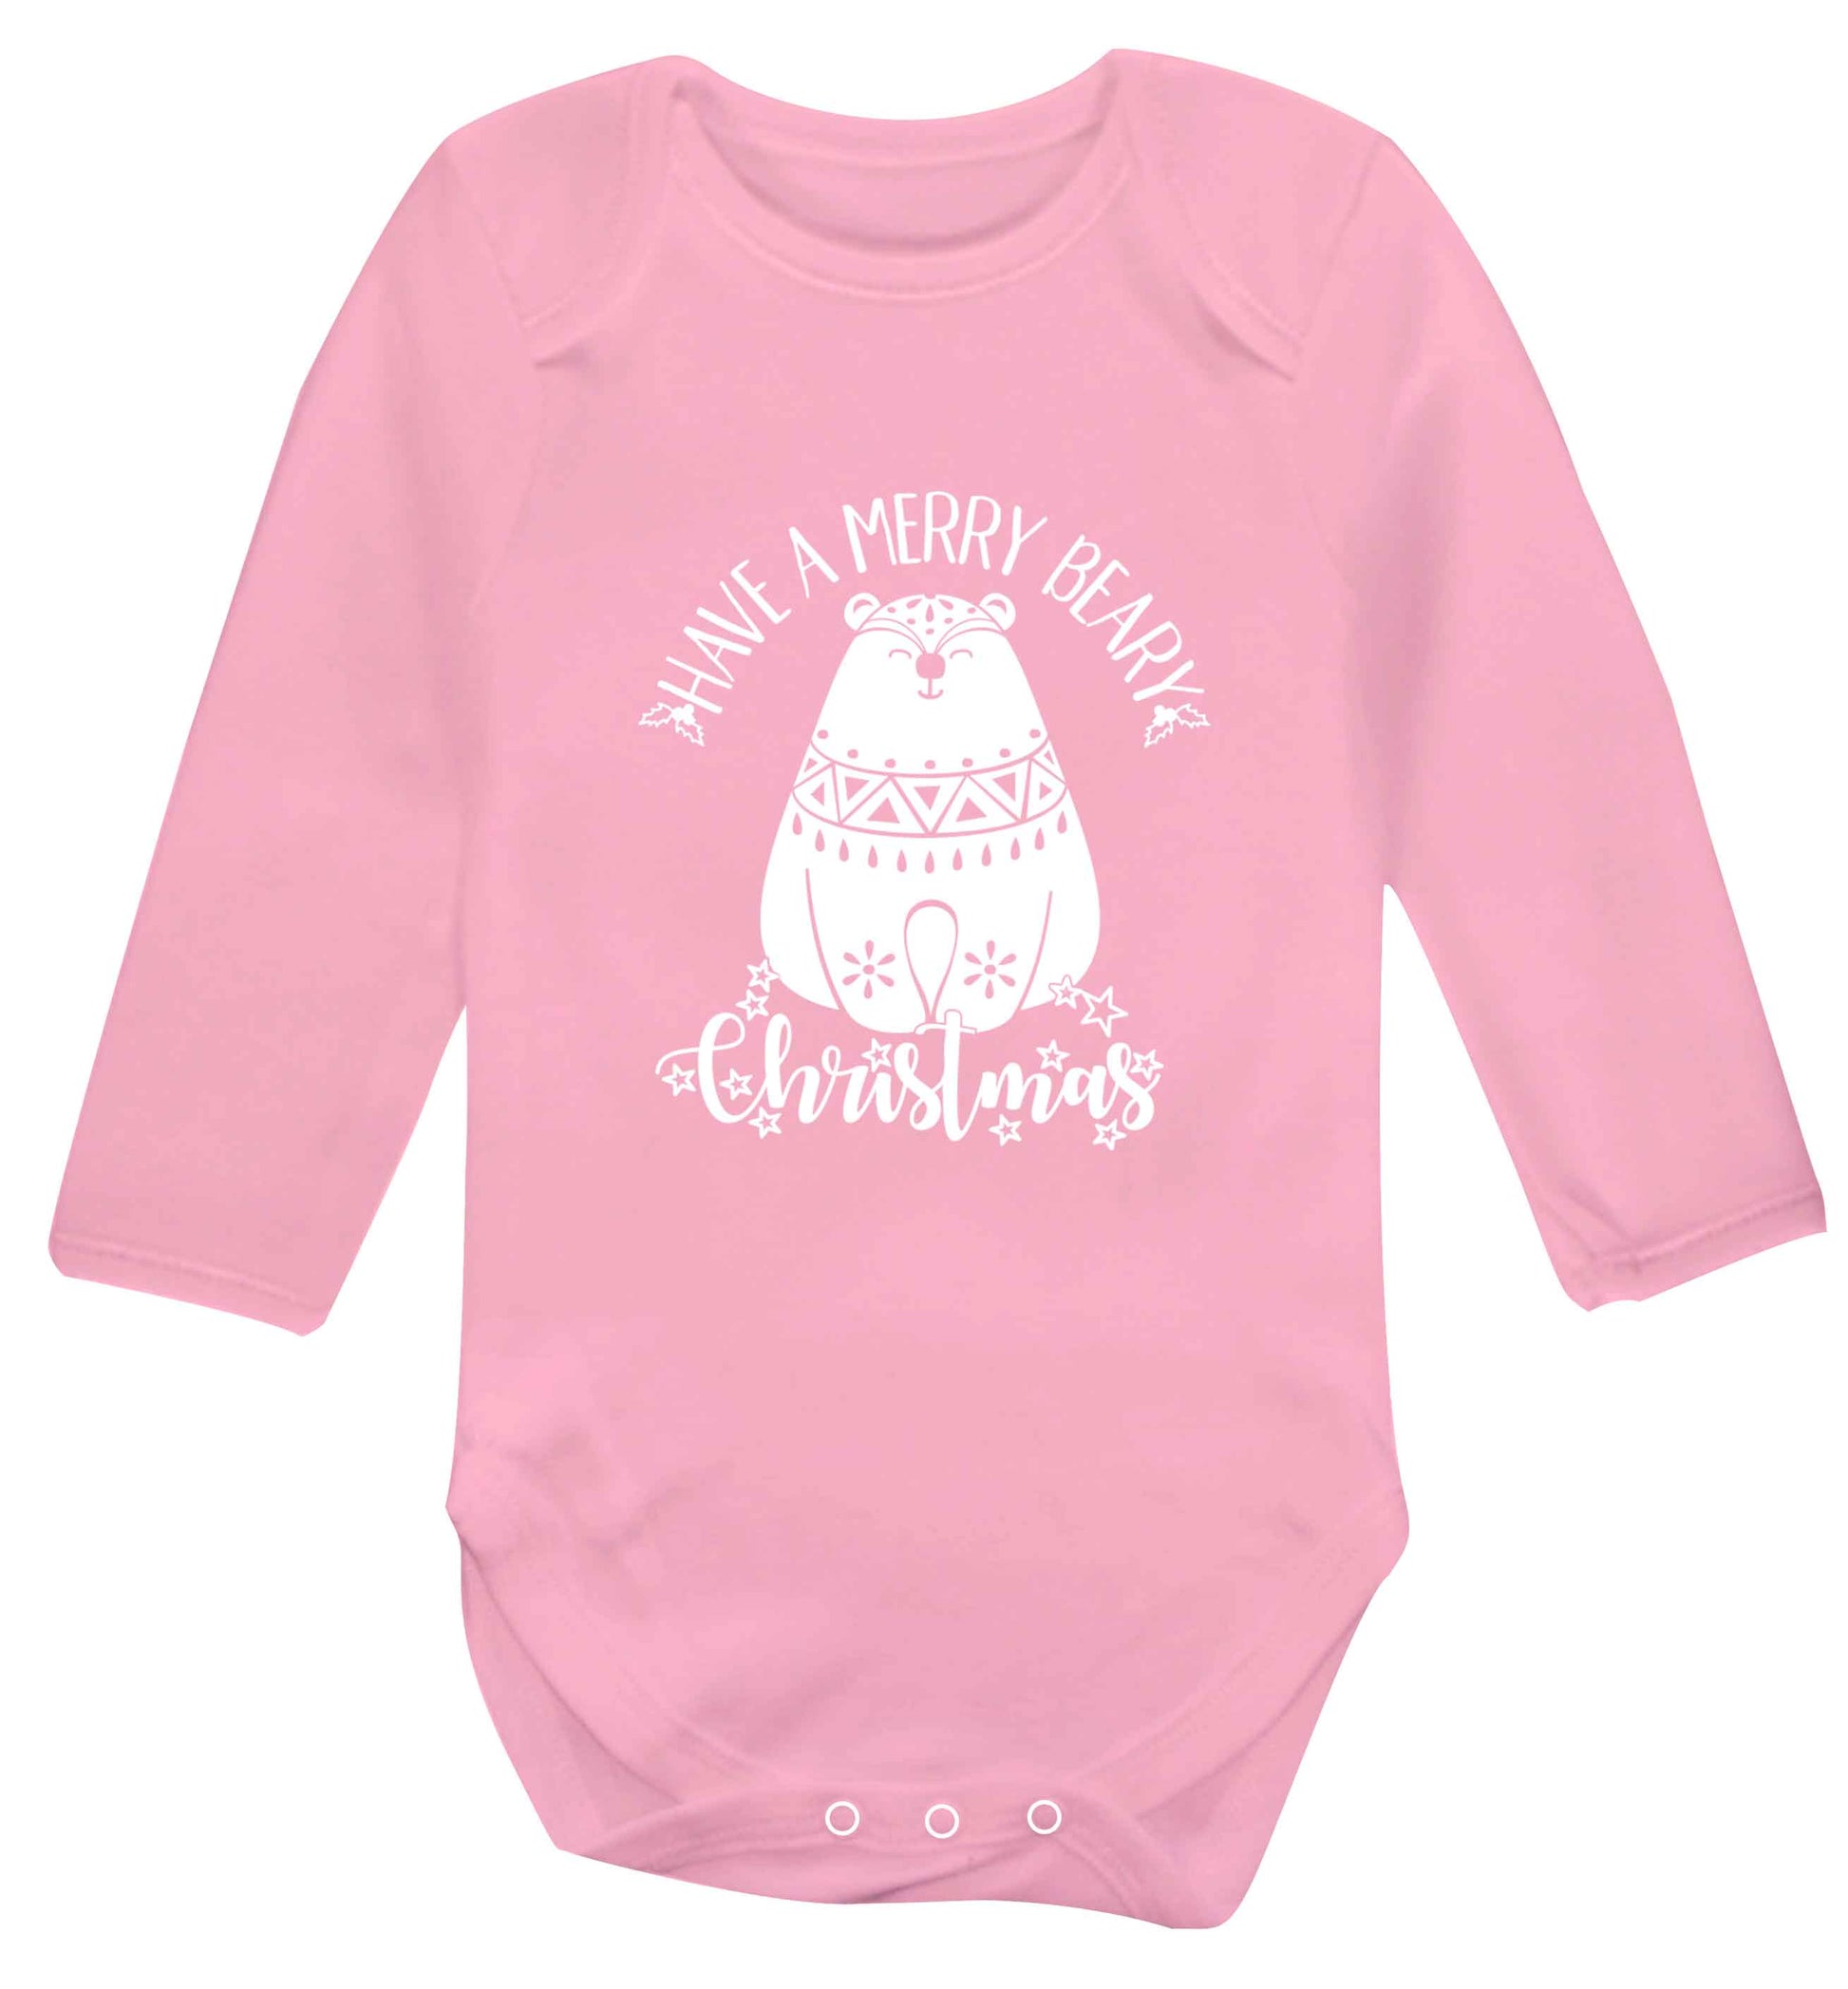 Have a merry beary Christmas Baby Vest long sleeved pale pink 6-12 months